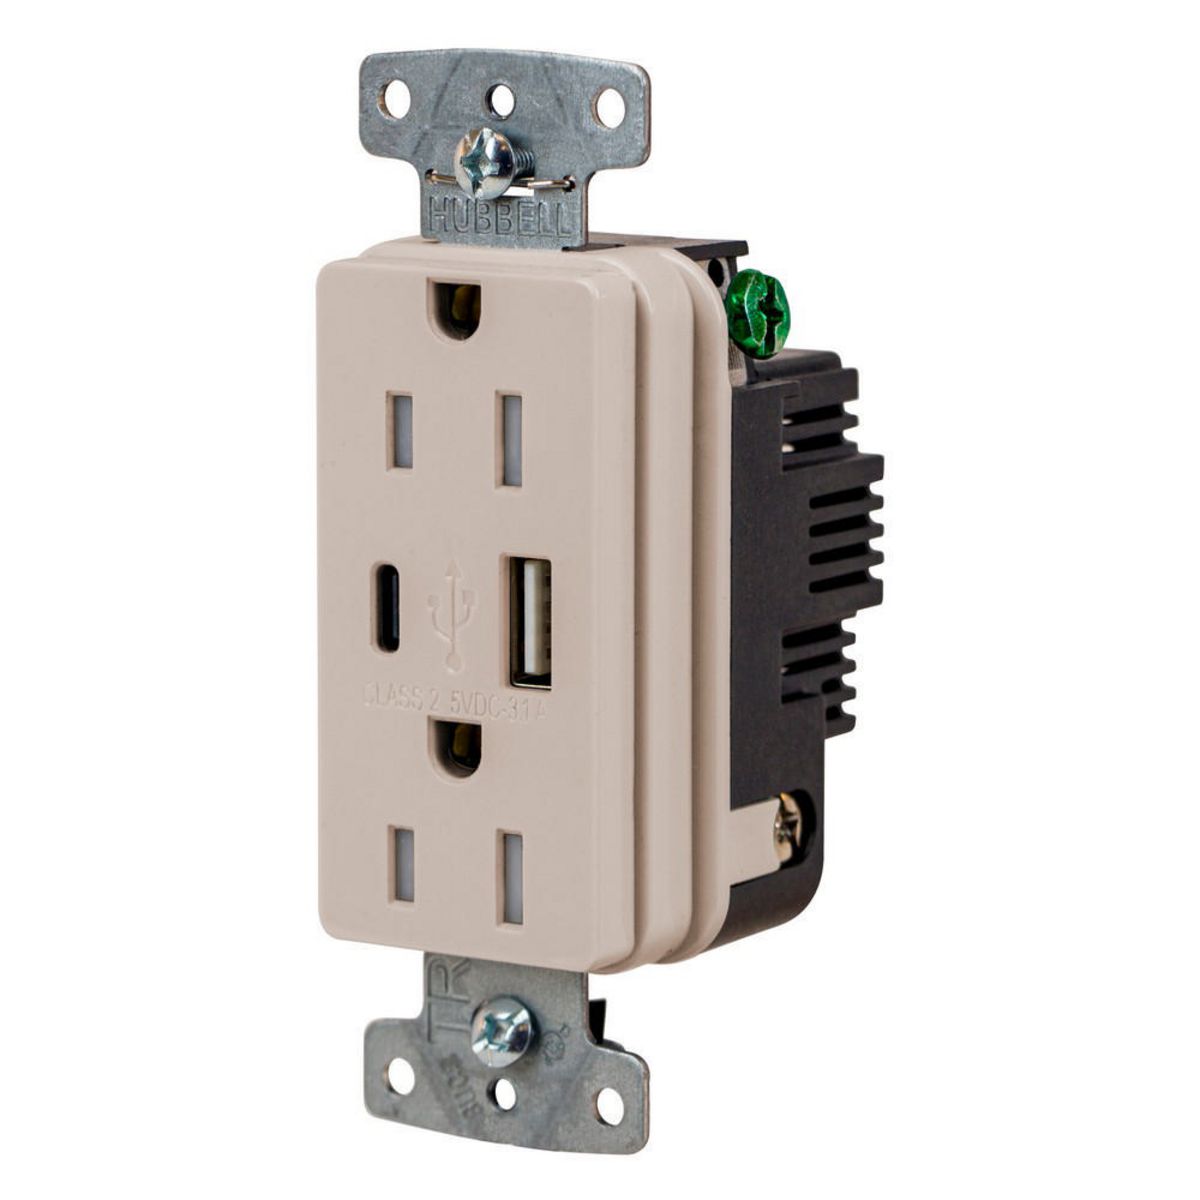 Usb Receptacle, 15A 125V, 2-P 3-W Grounding, 5-15R, Two 3.1 A Usb Port, Brown